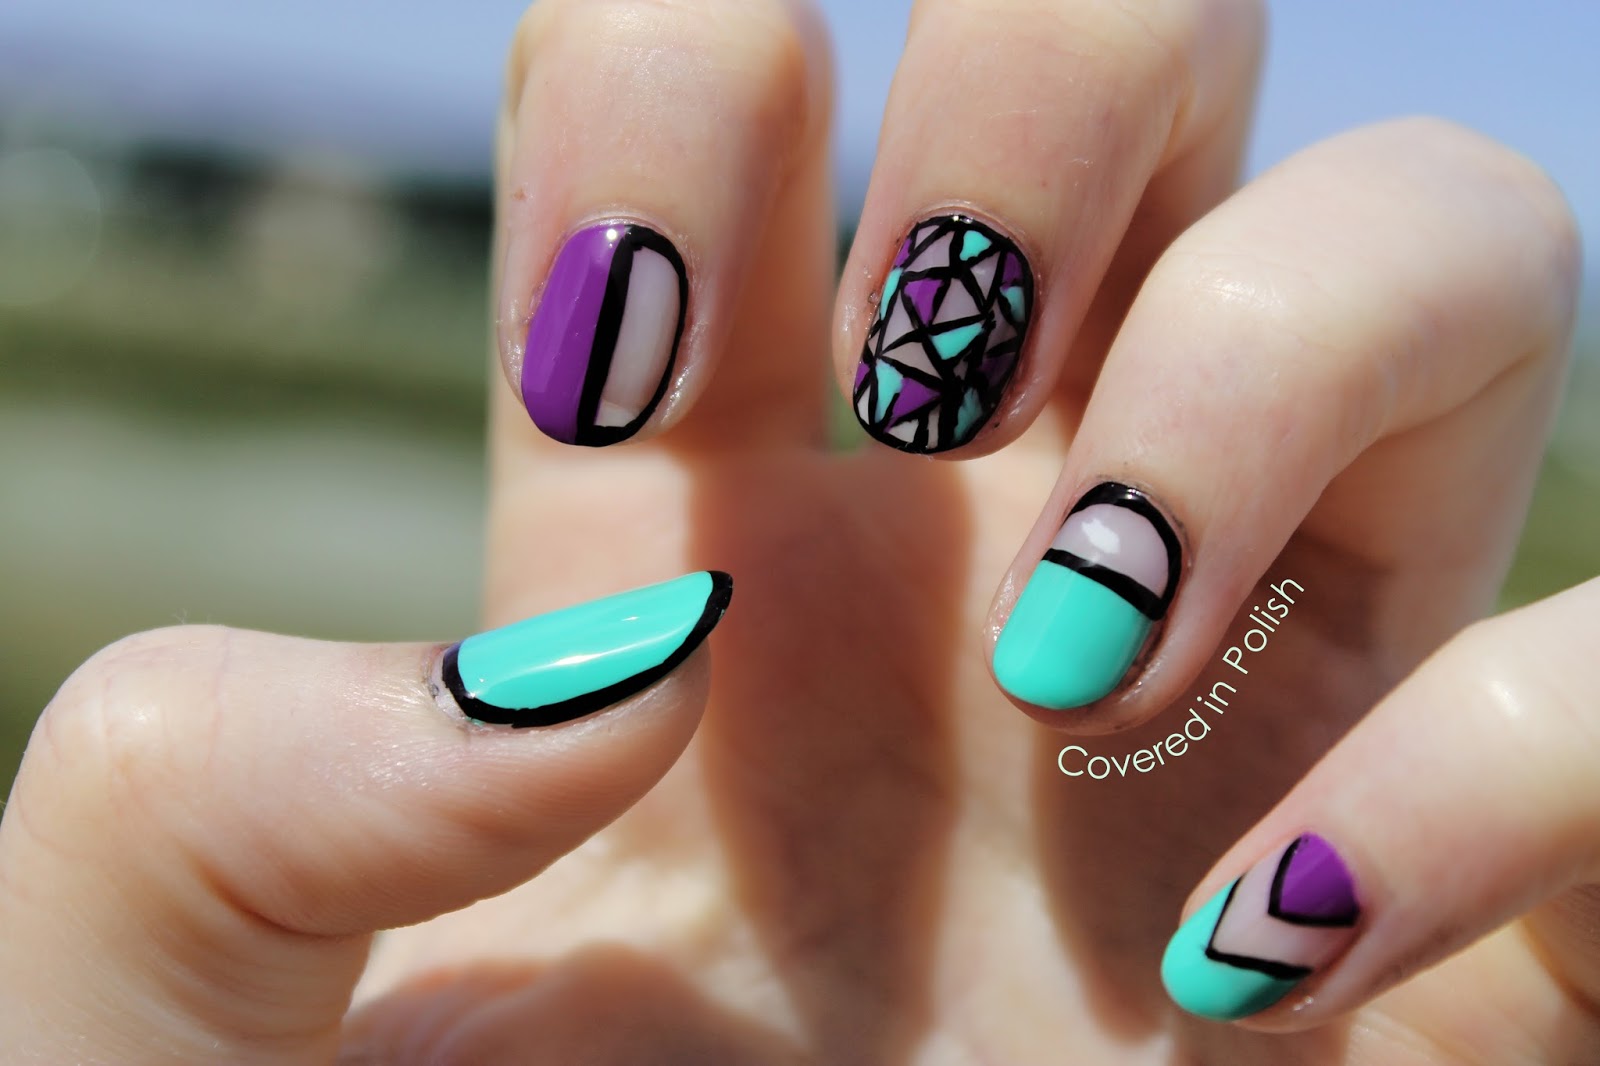 9. Negative Space Nails - wide 7